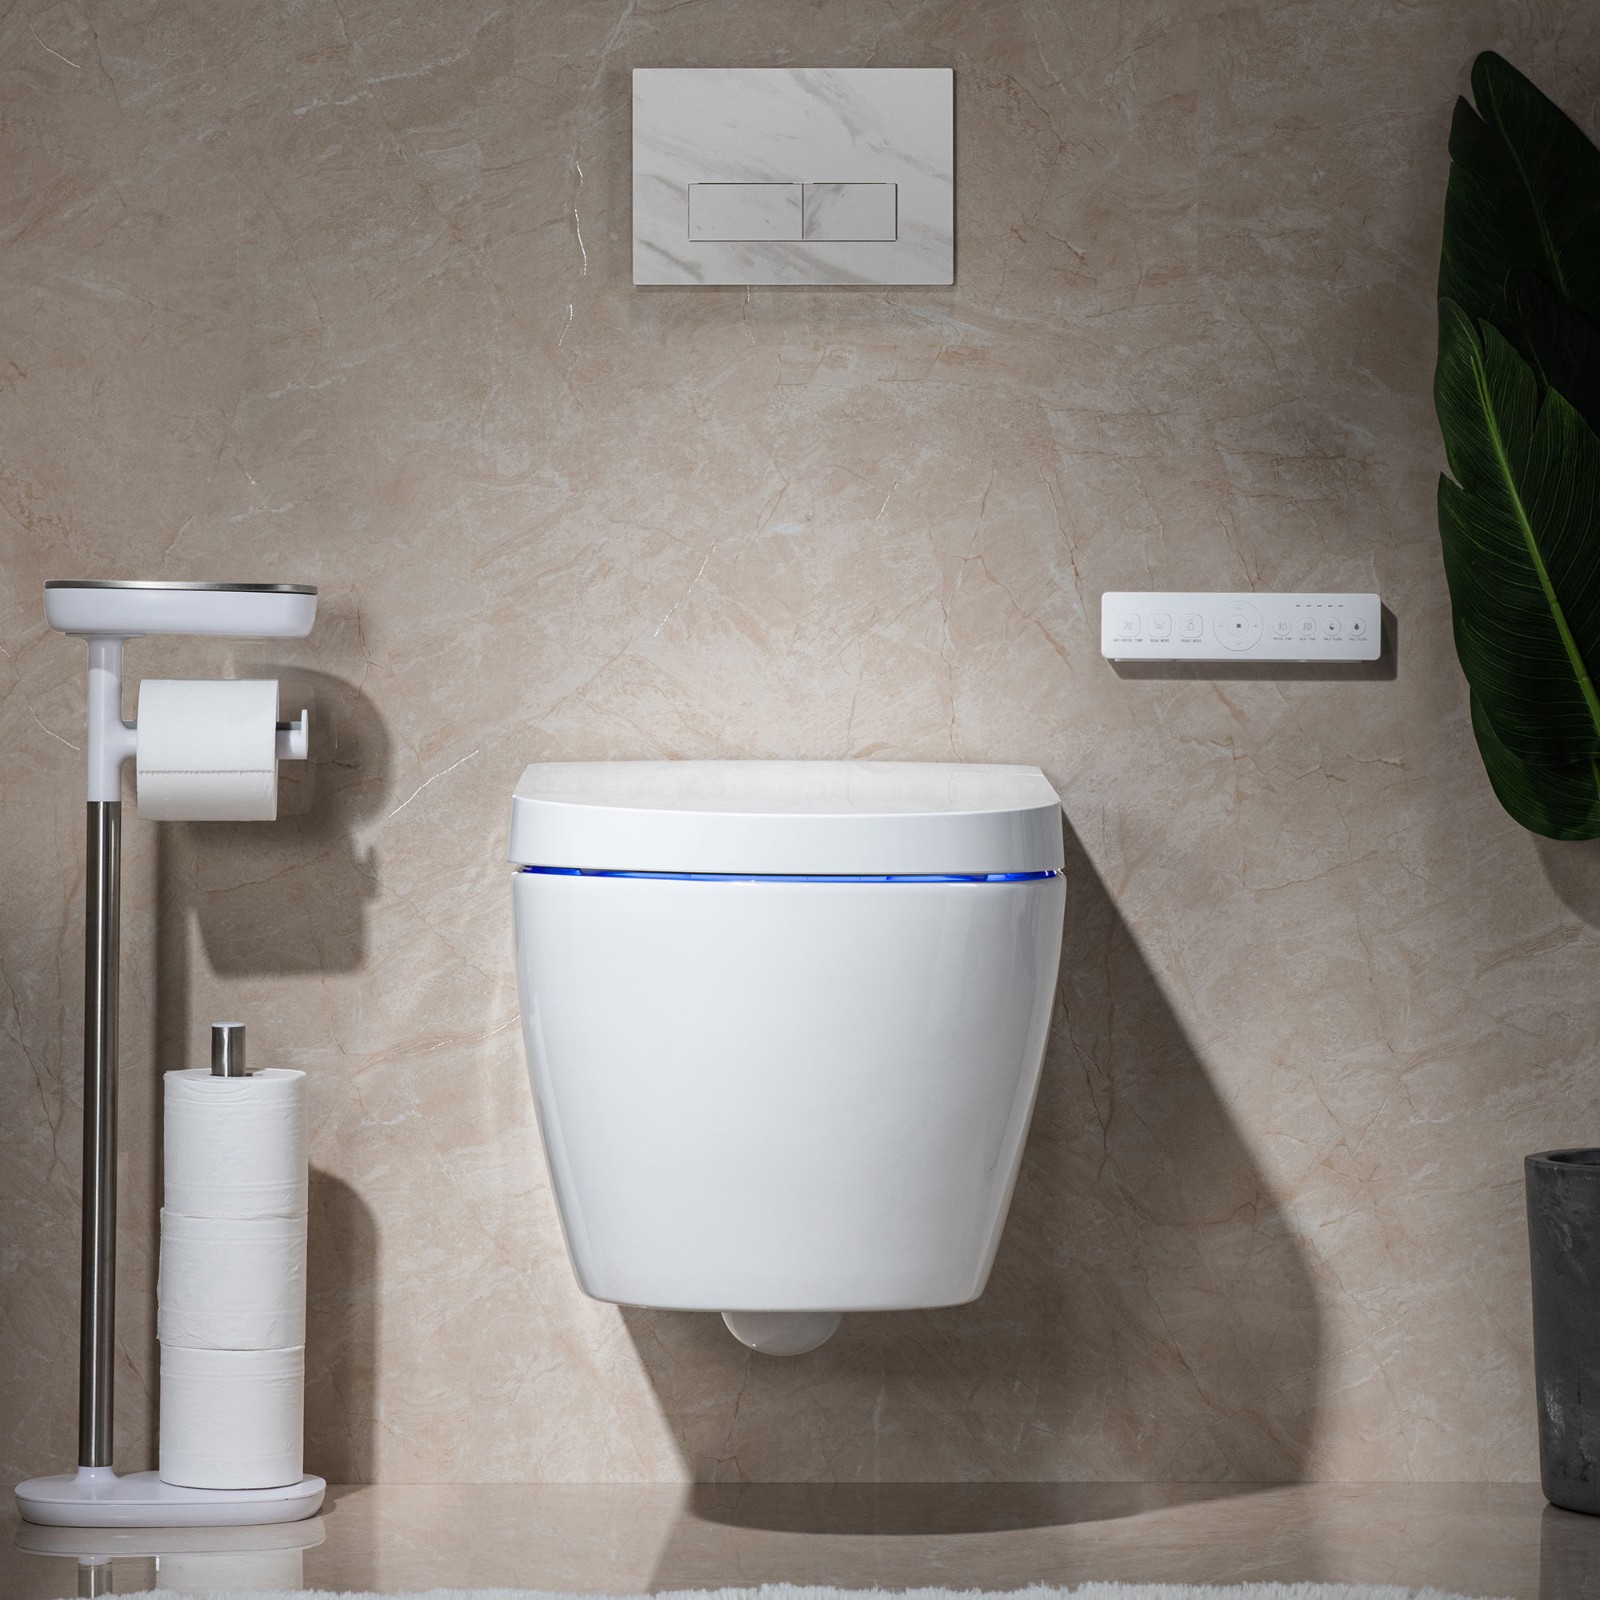  WOODBRIDGE  Intelligent Compact Elongated Dual-flush wall hung toilet with Bidet Wash Function, Heated Seat & Dryer. Matching Concealed Tank system and White Marble Stone Slim Flush Plates Included.LT611 + SWHT611+FP611-WH_545